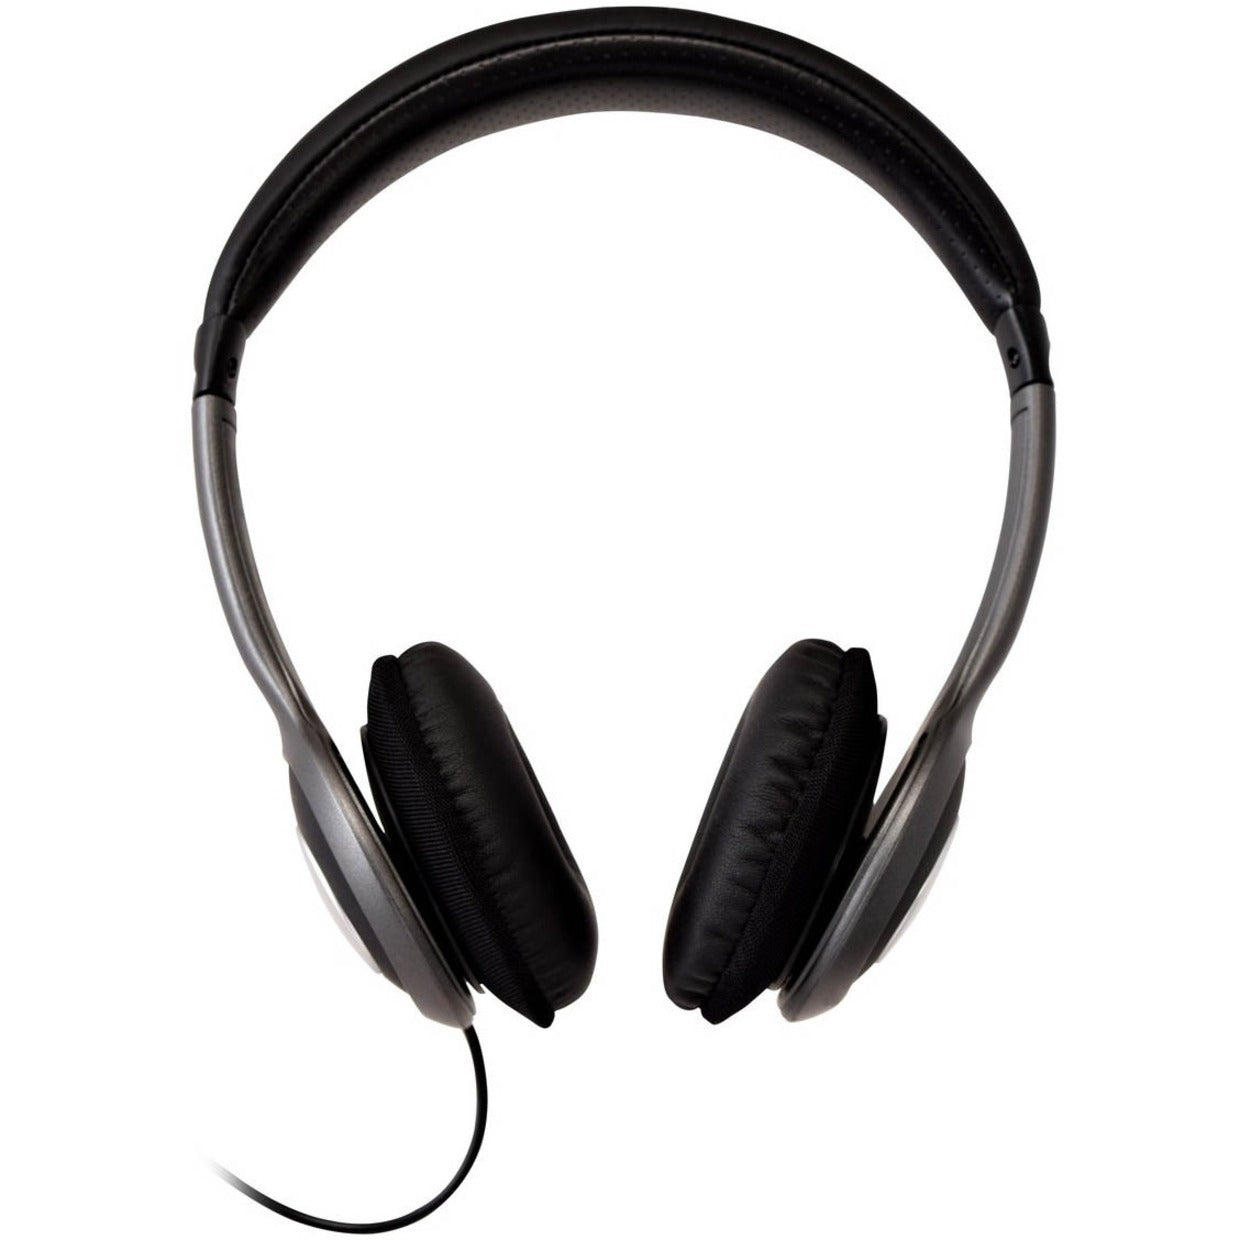 V7 HA520-2NP Deluxe Stereo Headphones with Volume Control, Over-the-head, 2 Year Warranty, Mini-phone (3.5mm) Interface